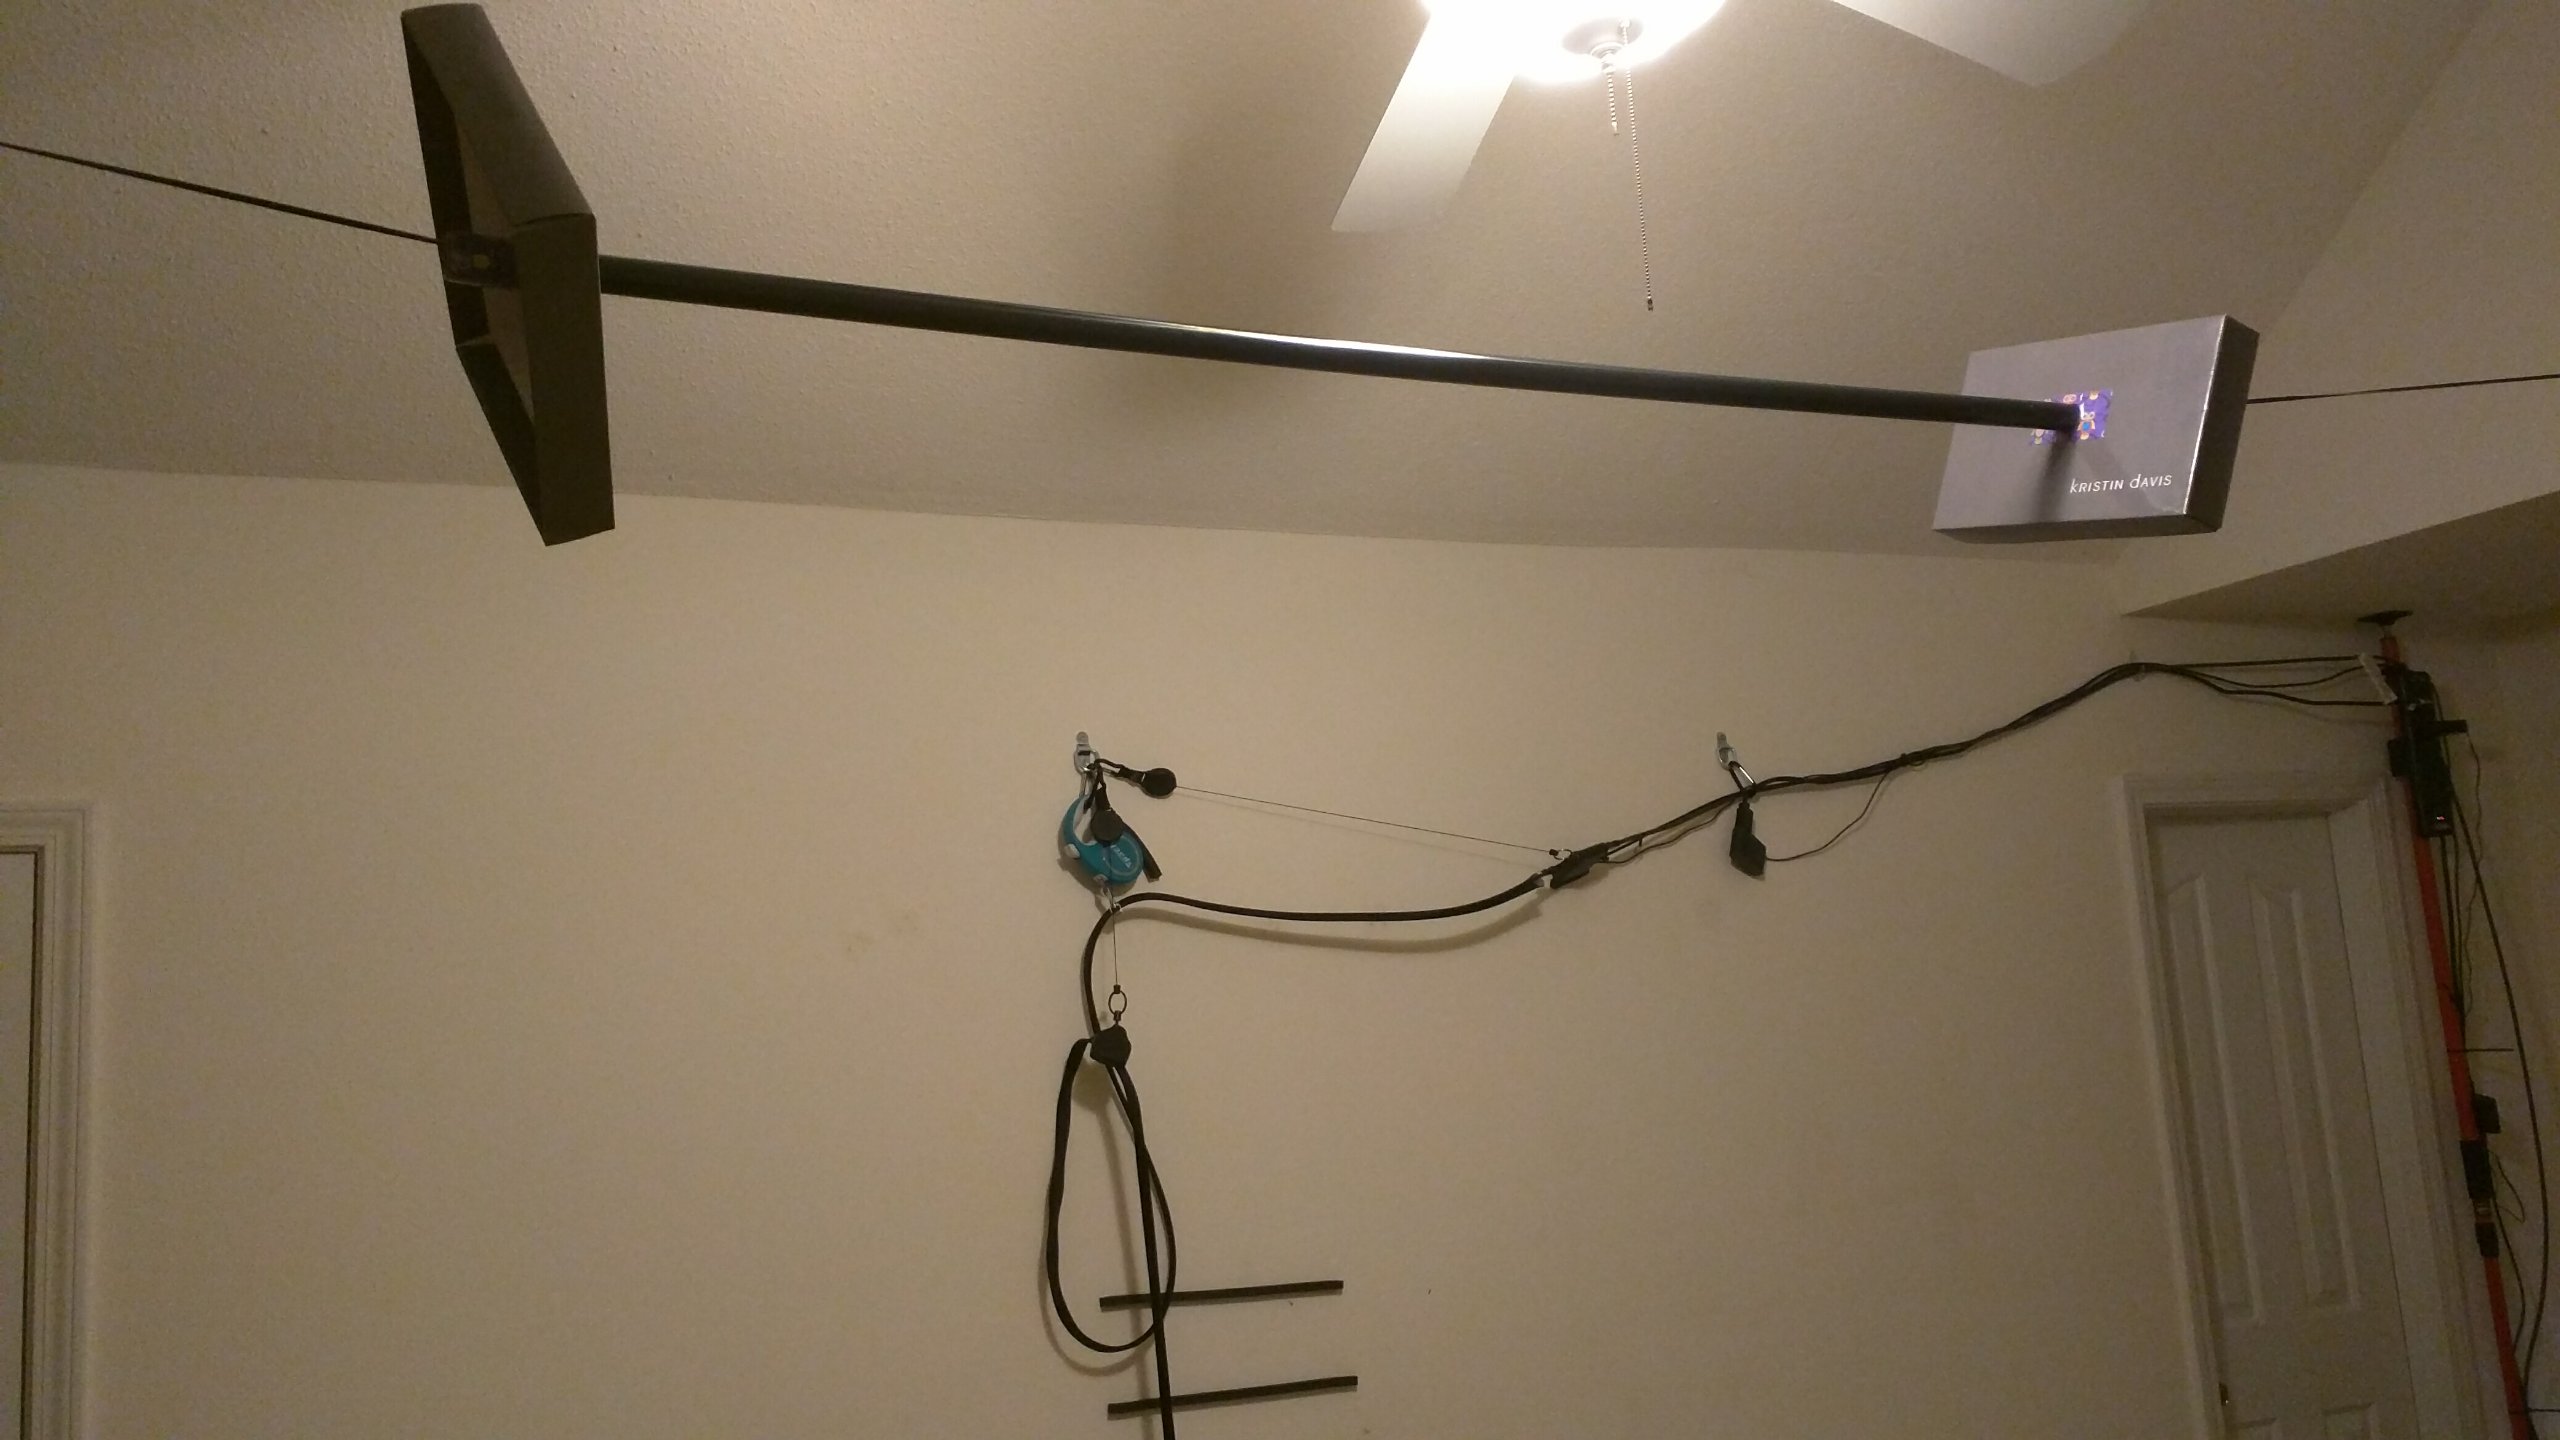 Cable management for 14x11 ft room with ceiling fan. : r/Vive